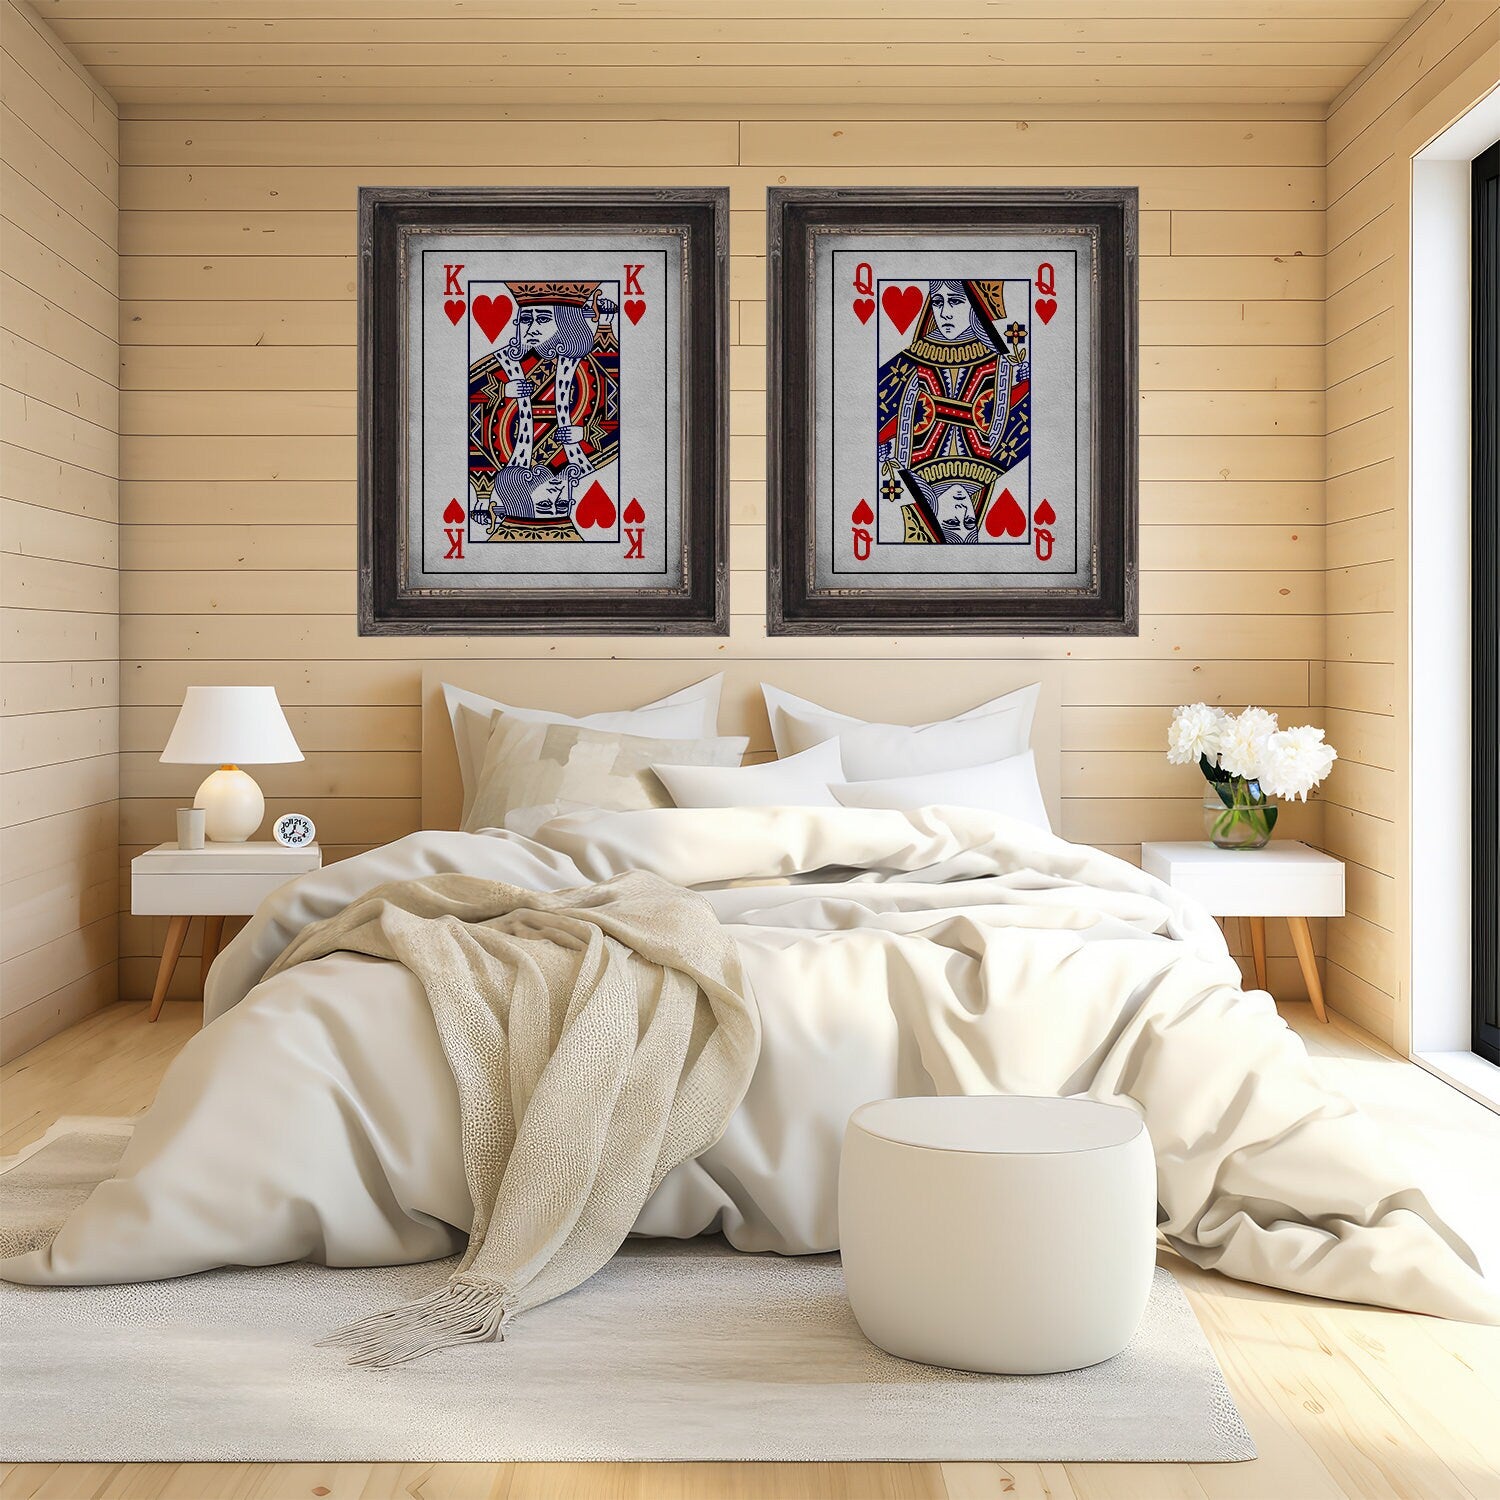 King & Queen of Hearts Playing Card Fine Prints - Rustic Poker Card Posters at Adirondack Retro